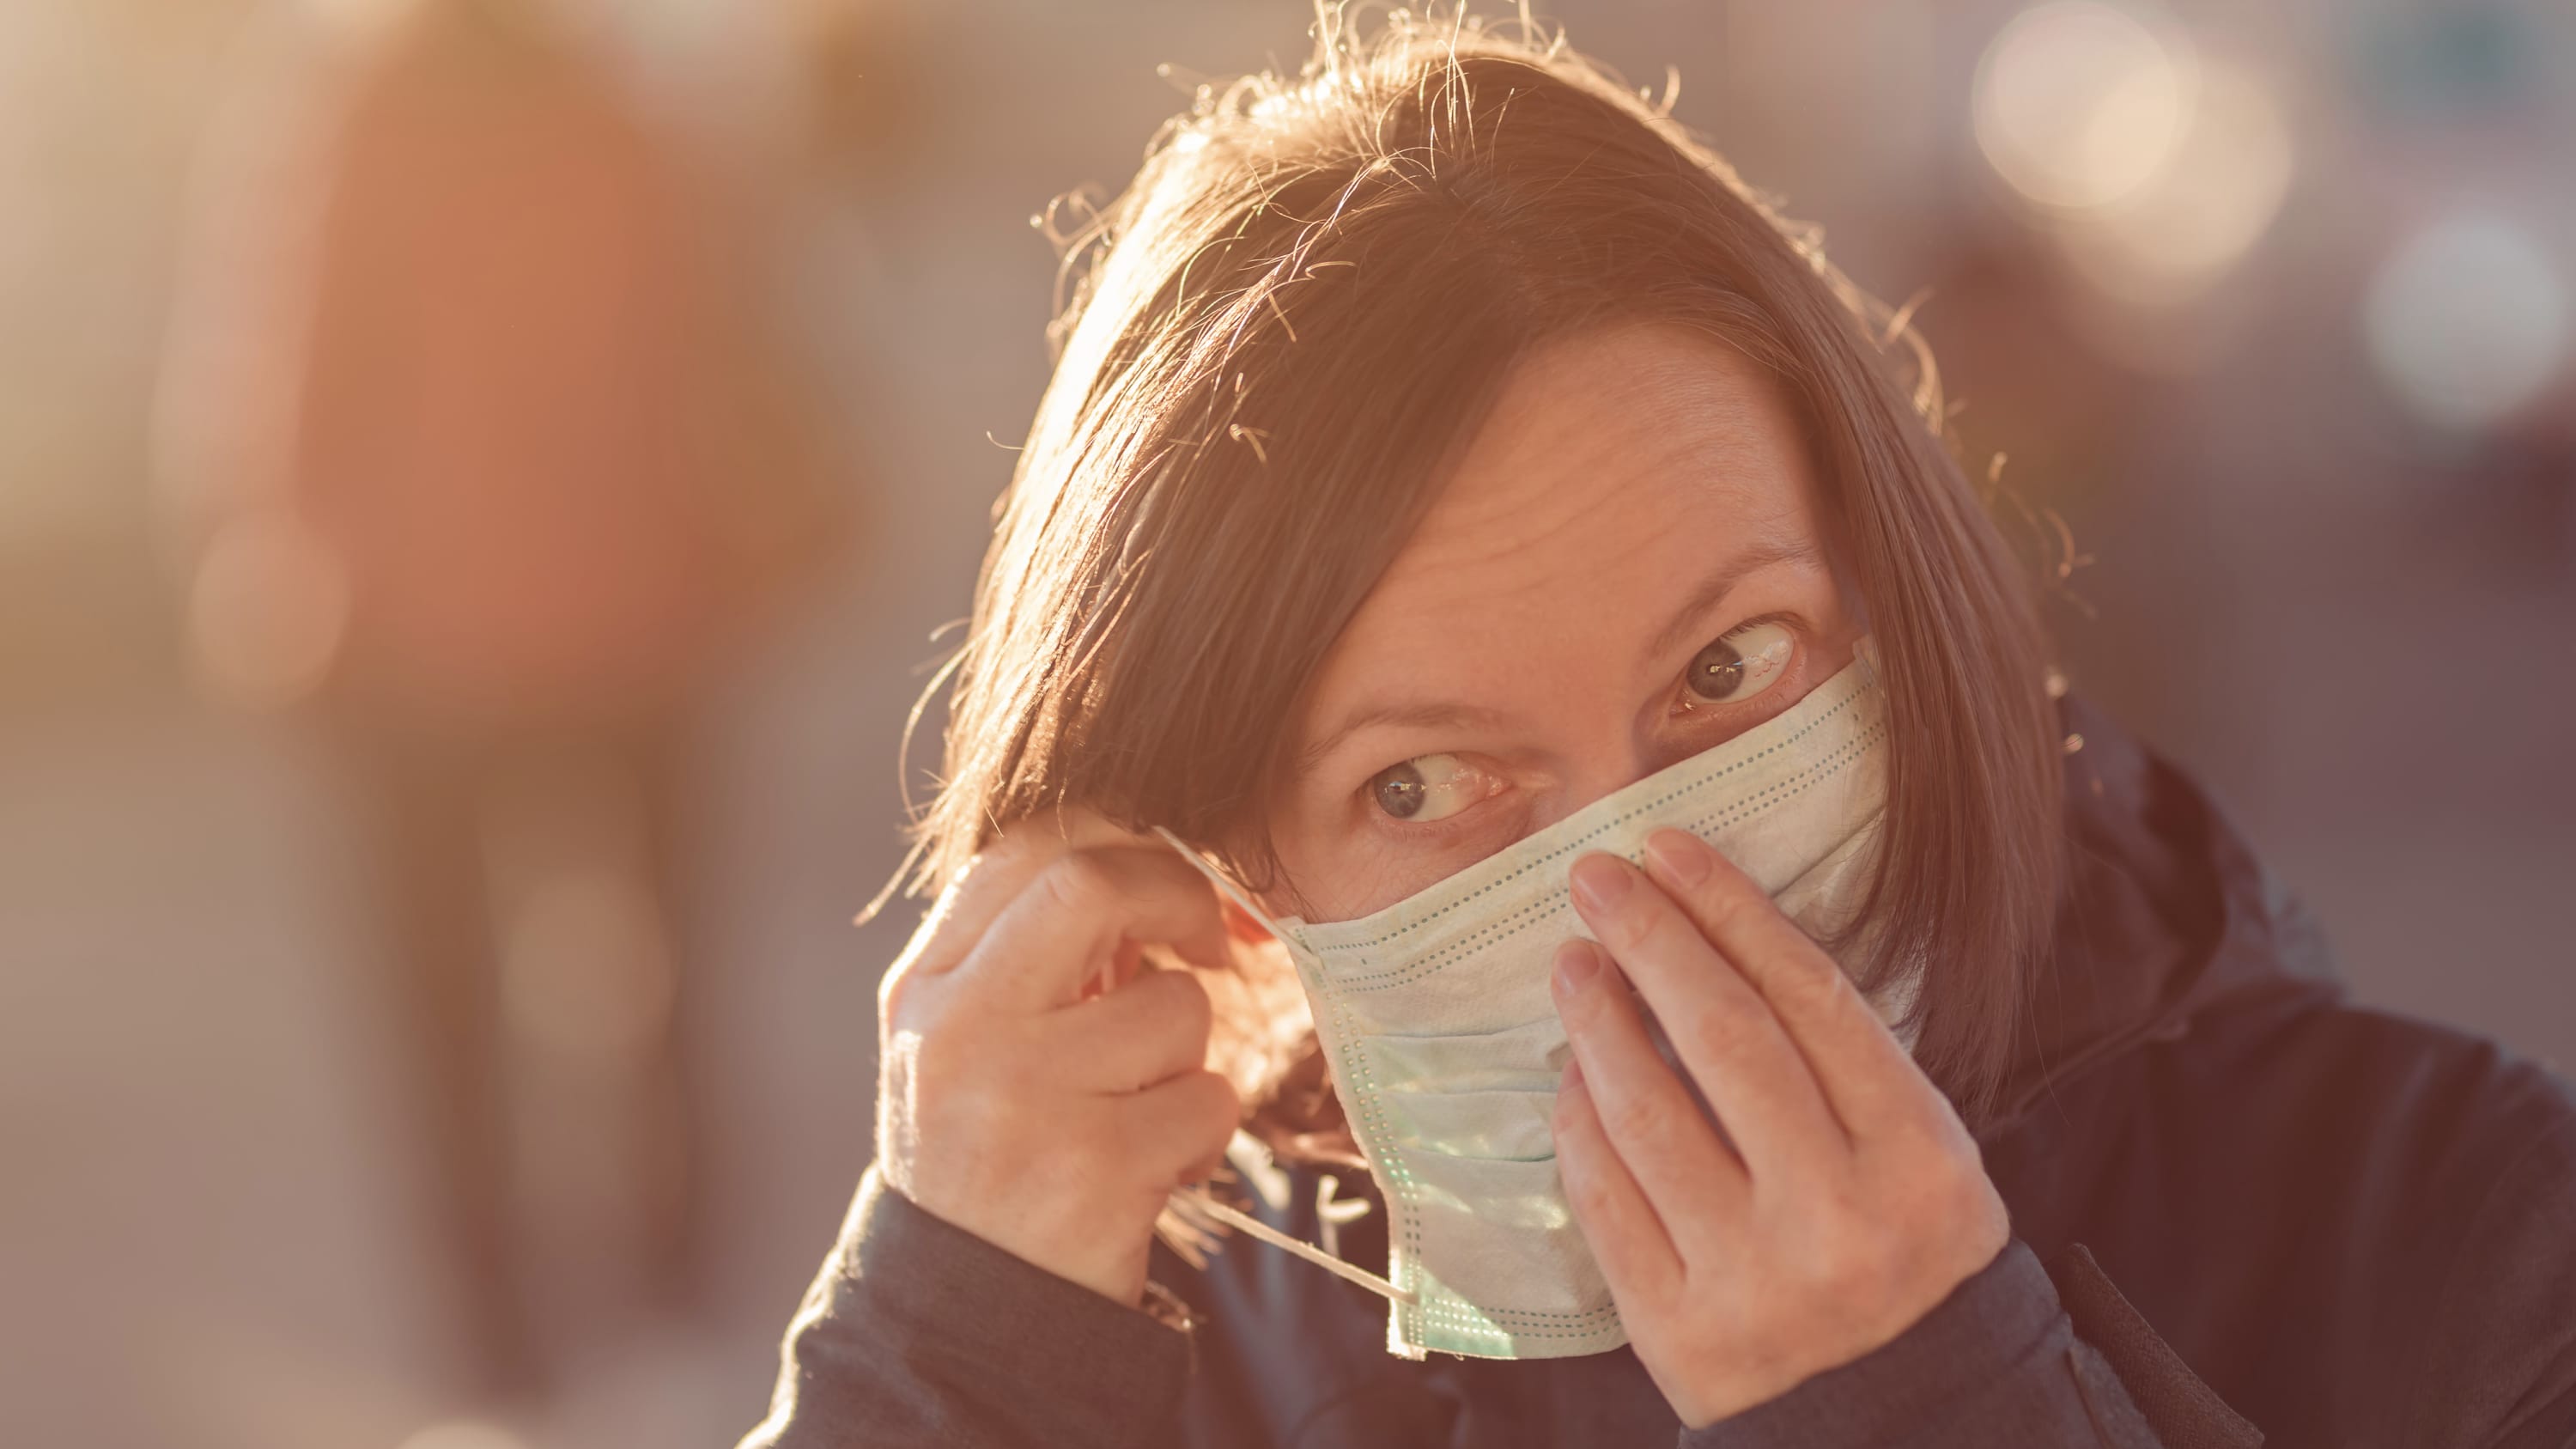 Woman with face protective mask standing on the street, possibly with post-COVID-19 symptoms